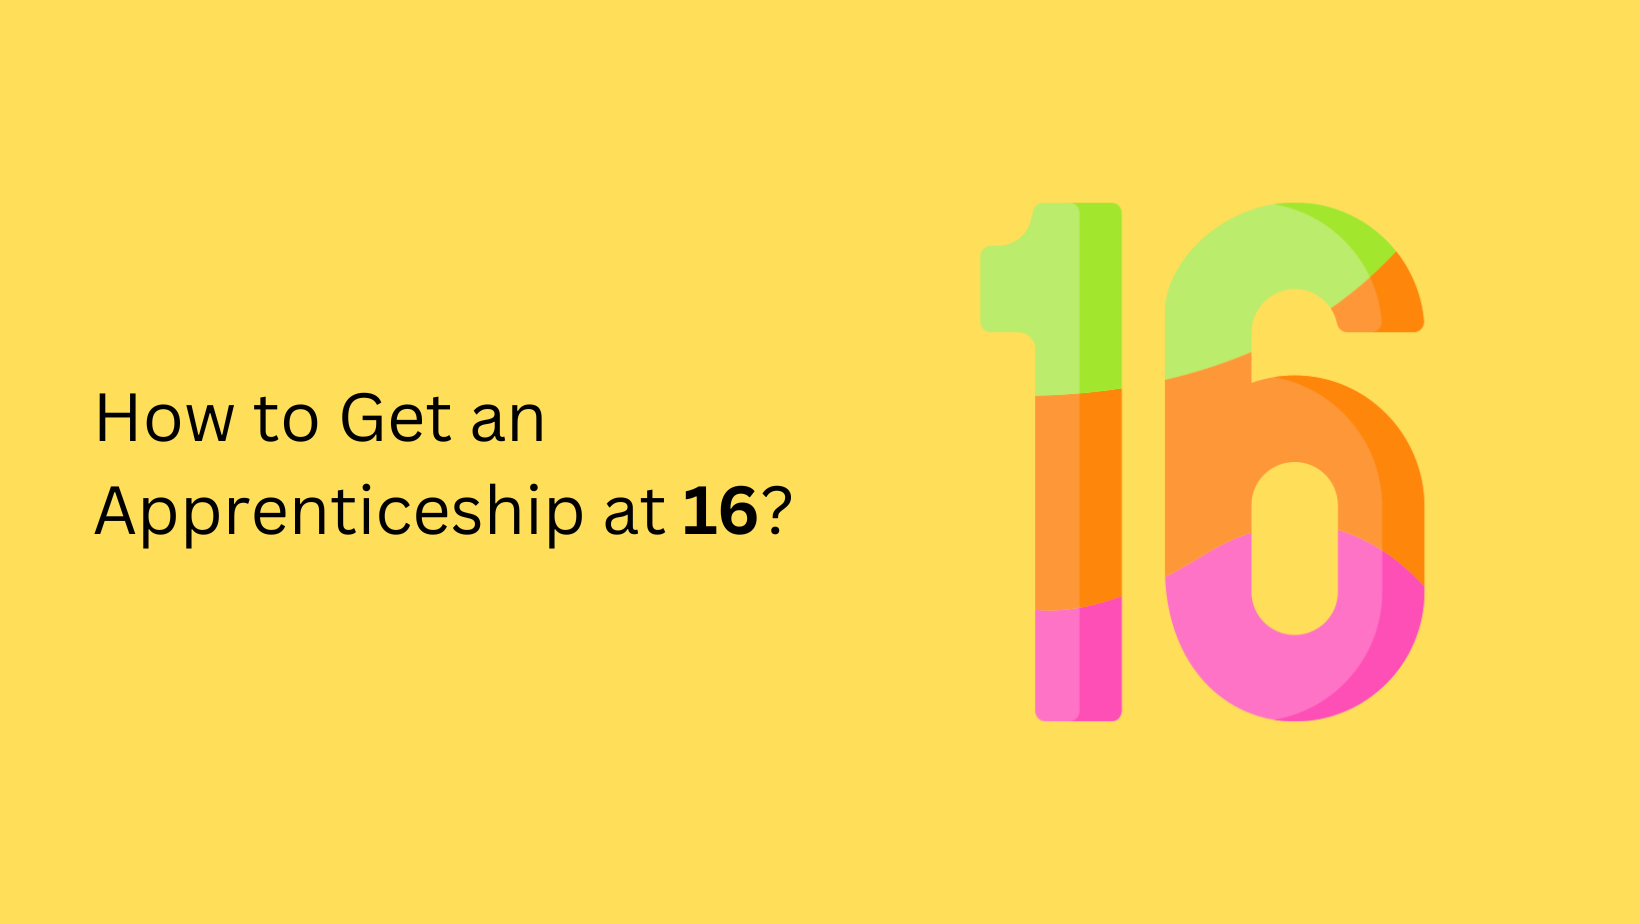 How To Get An Apprenticeship At 16